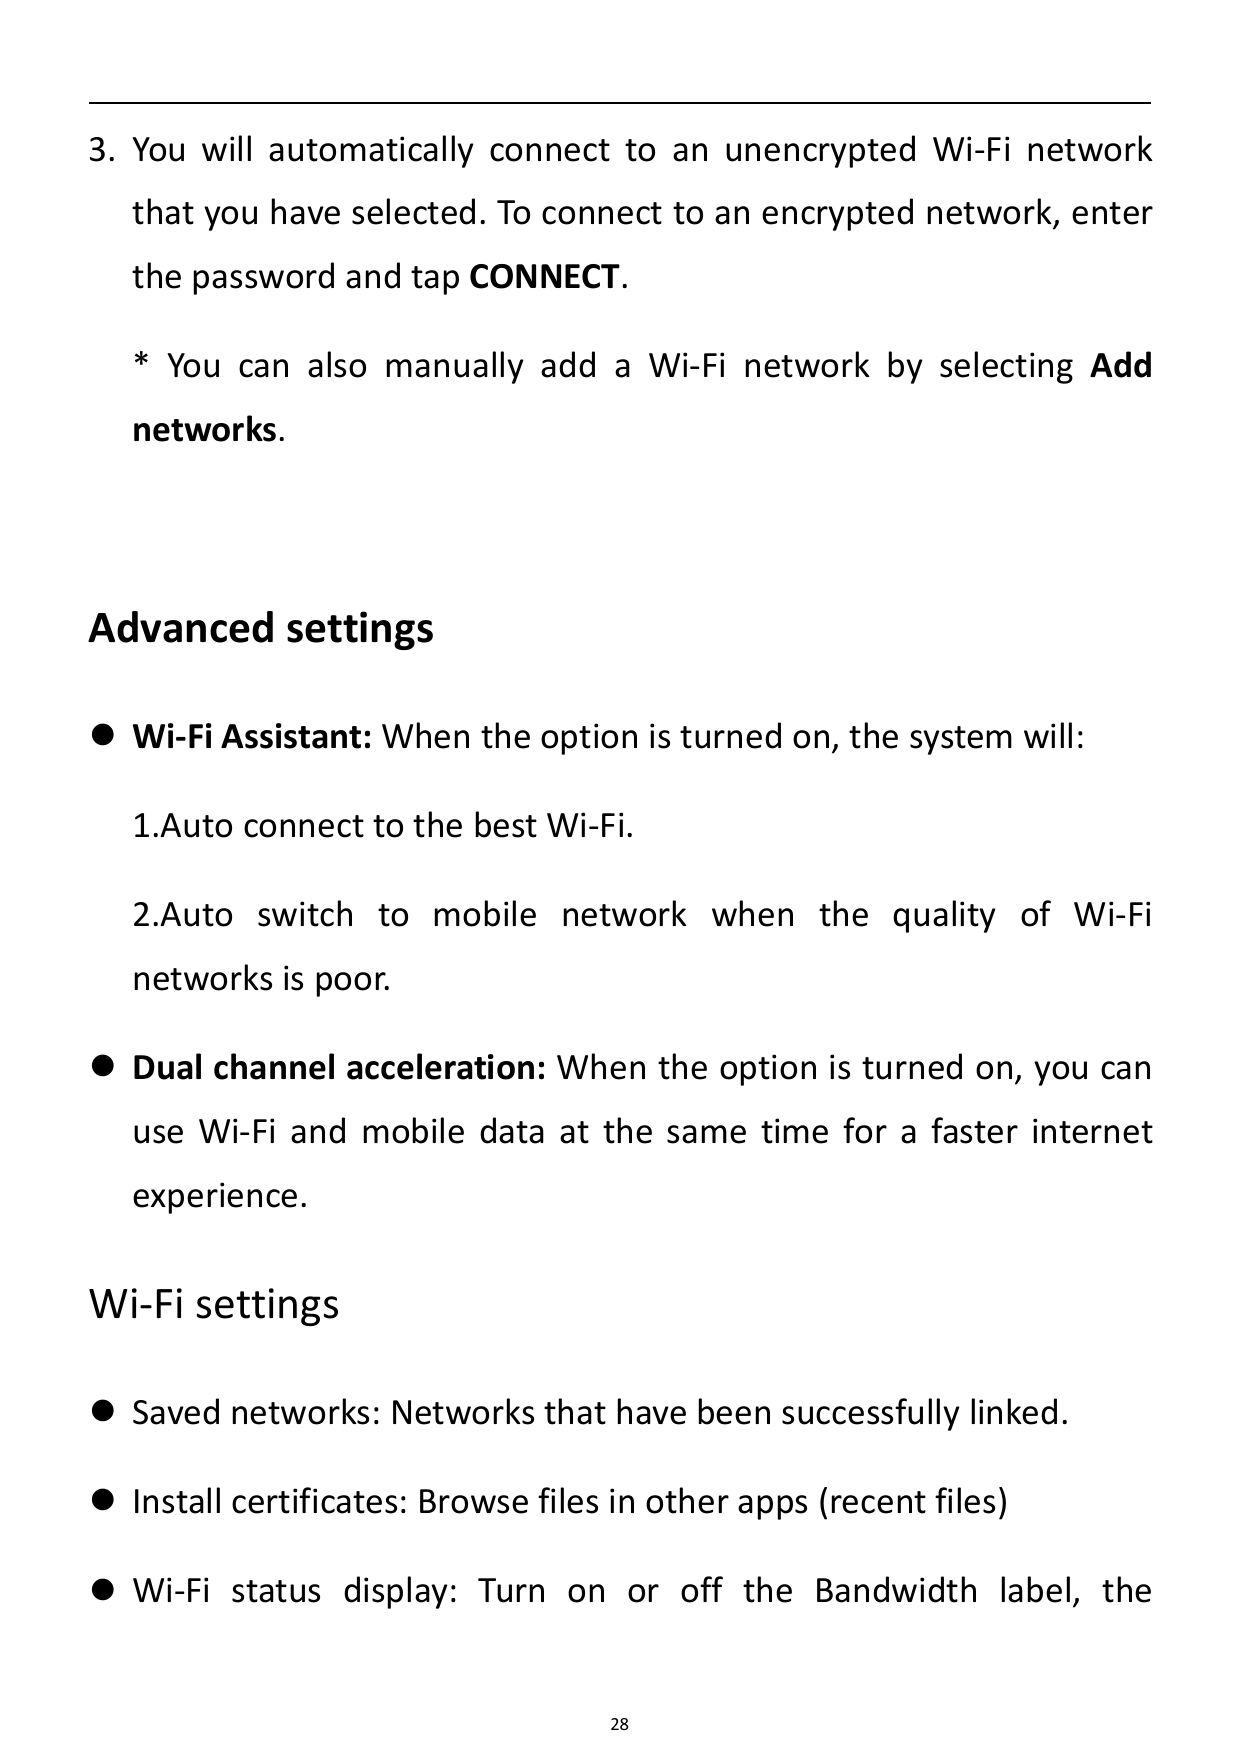 3. You will automatically connect to an unencrypted Wi-Fi networkthat you have selected. To connect to an encrypted network, ent